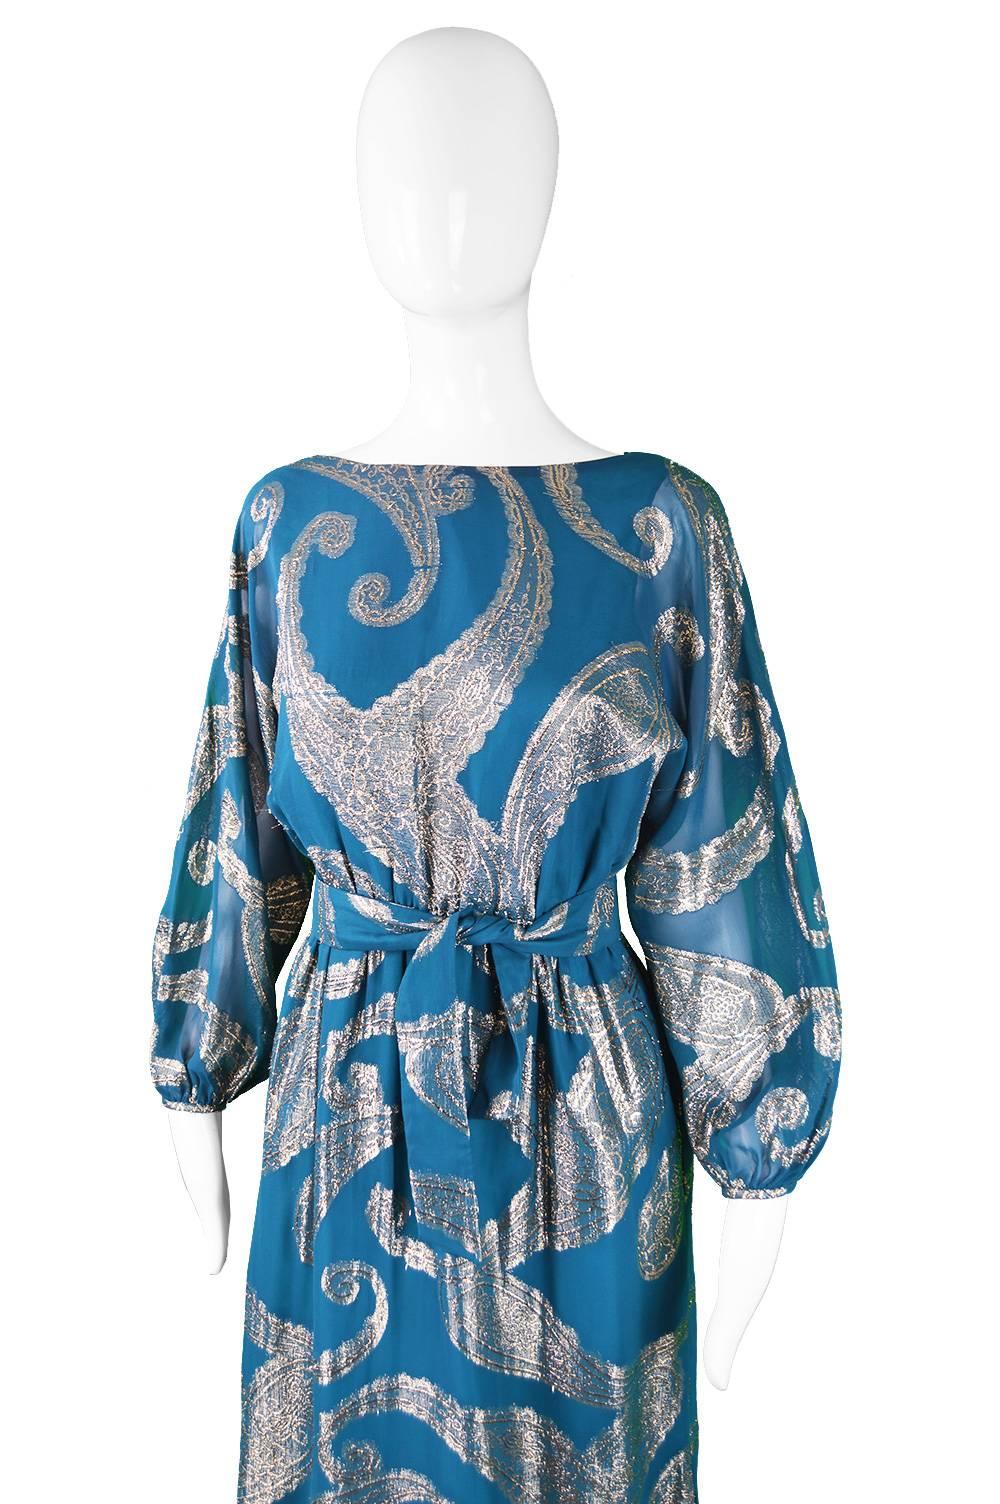 Victor Costa Vintage Gold Paisley Brocade & Teal Chiffon Maxi Dress, 1970s In Excellent Condition In Doncaster, South Yorkshire